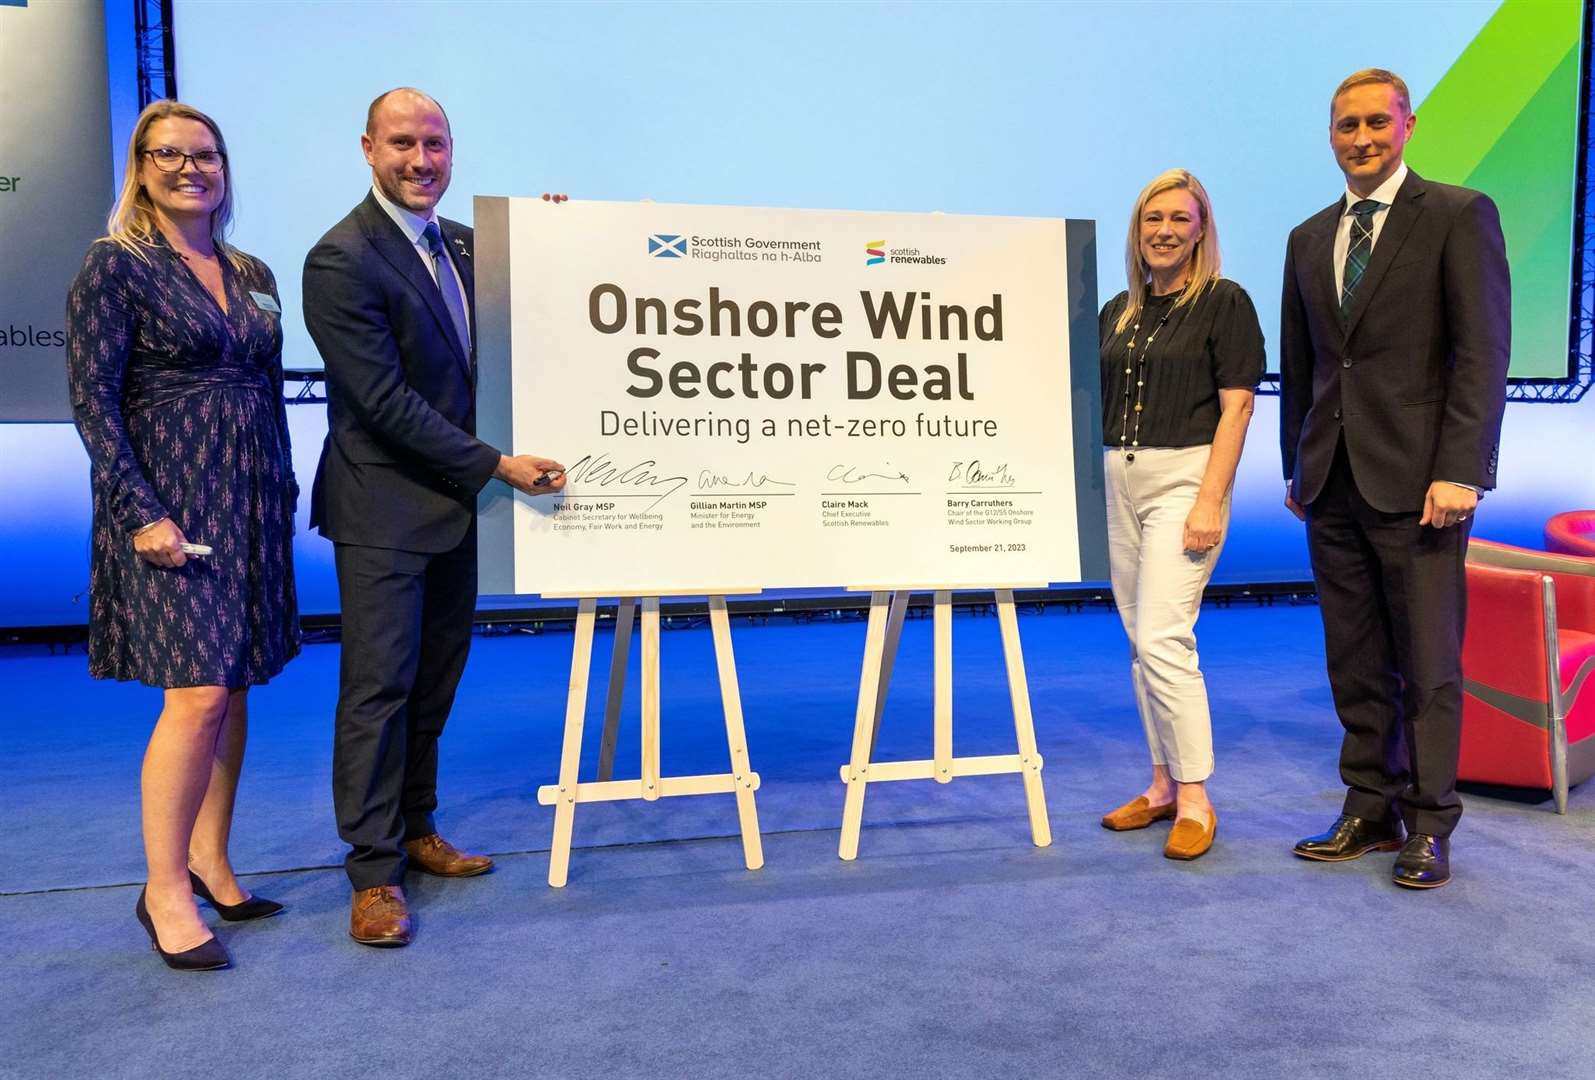 I recently joined Energy Secretary Neil Gray, Chief Executive of Scottish Renewables Claire Mack and Managing Director Onshore UK and Ireland for ScottishPower Renewables Barry Carruthers for the the historic Onshore Wind Sector Deal signing at the Scottish Renewables Onshore Wind Conference in Edinburgh.